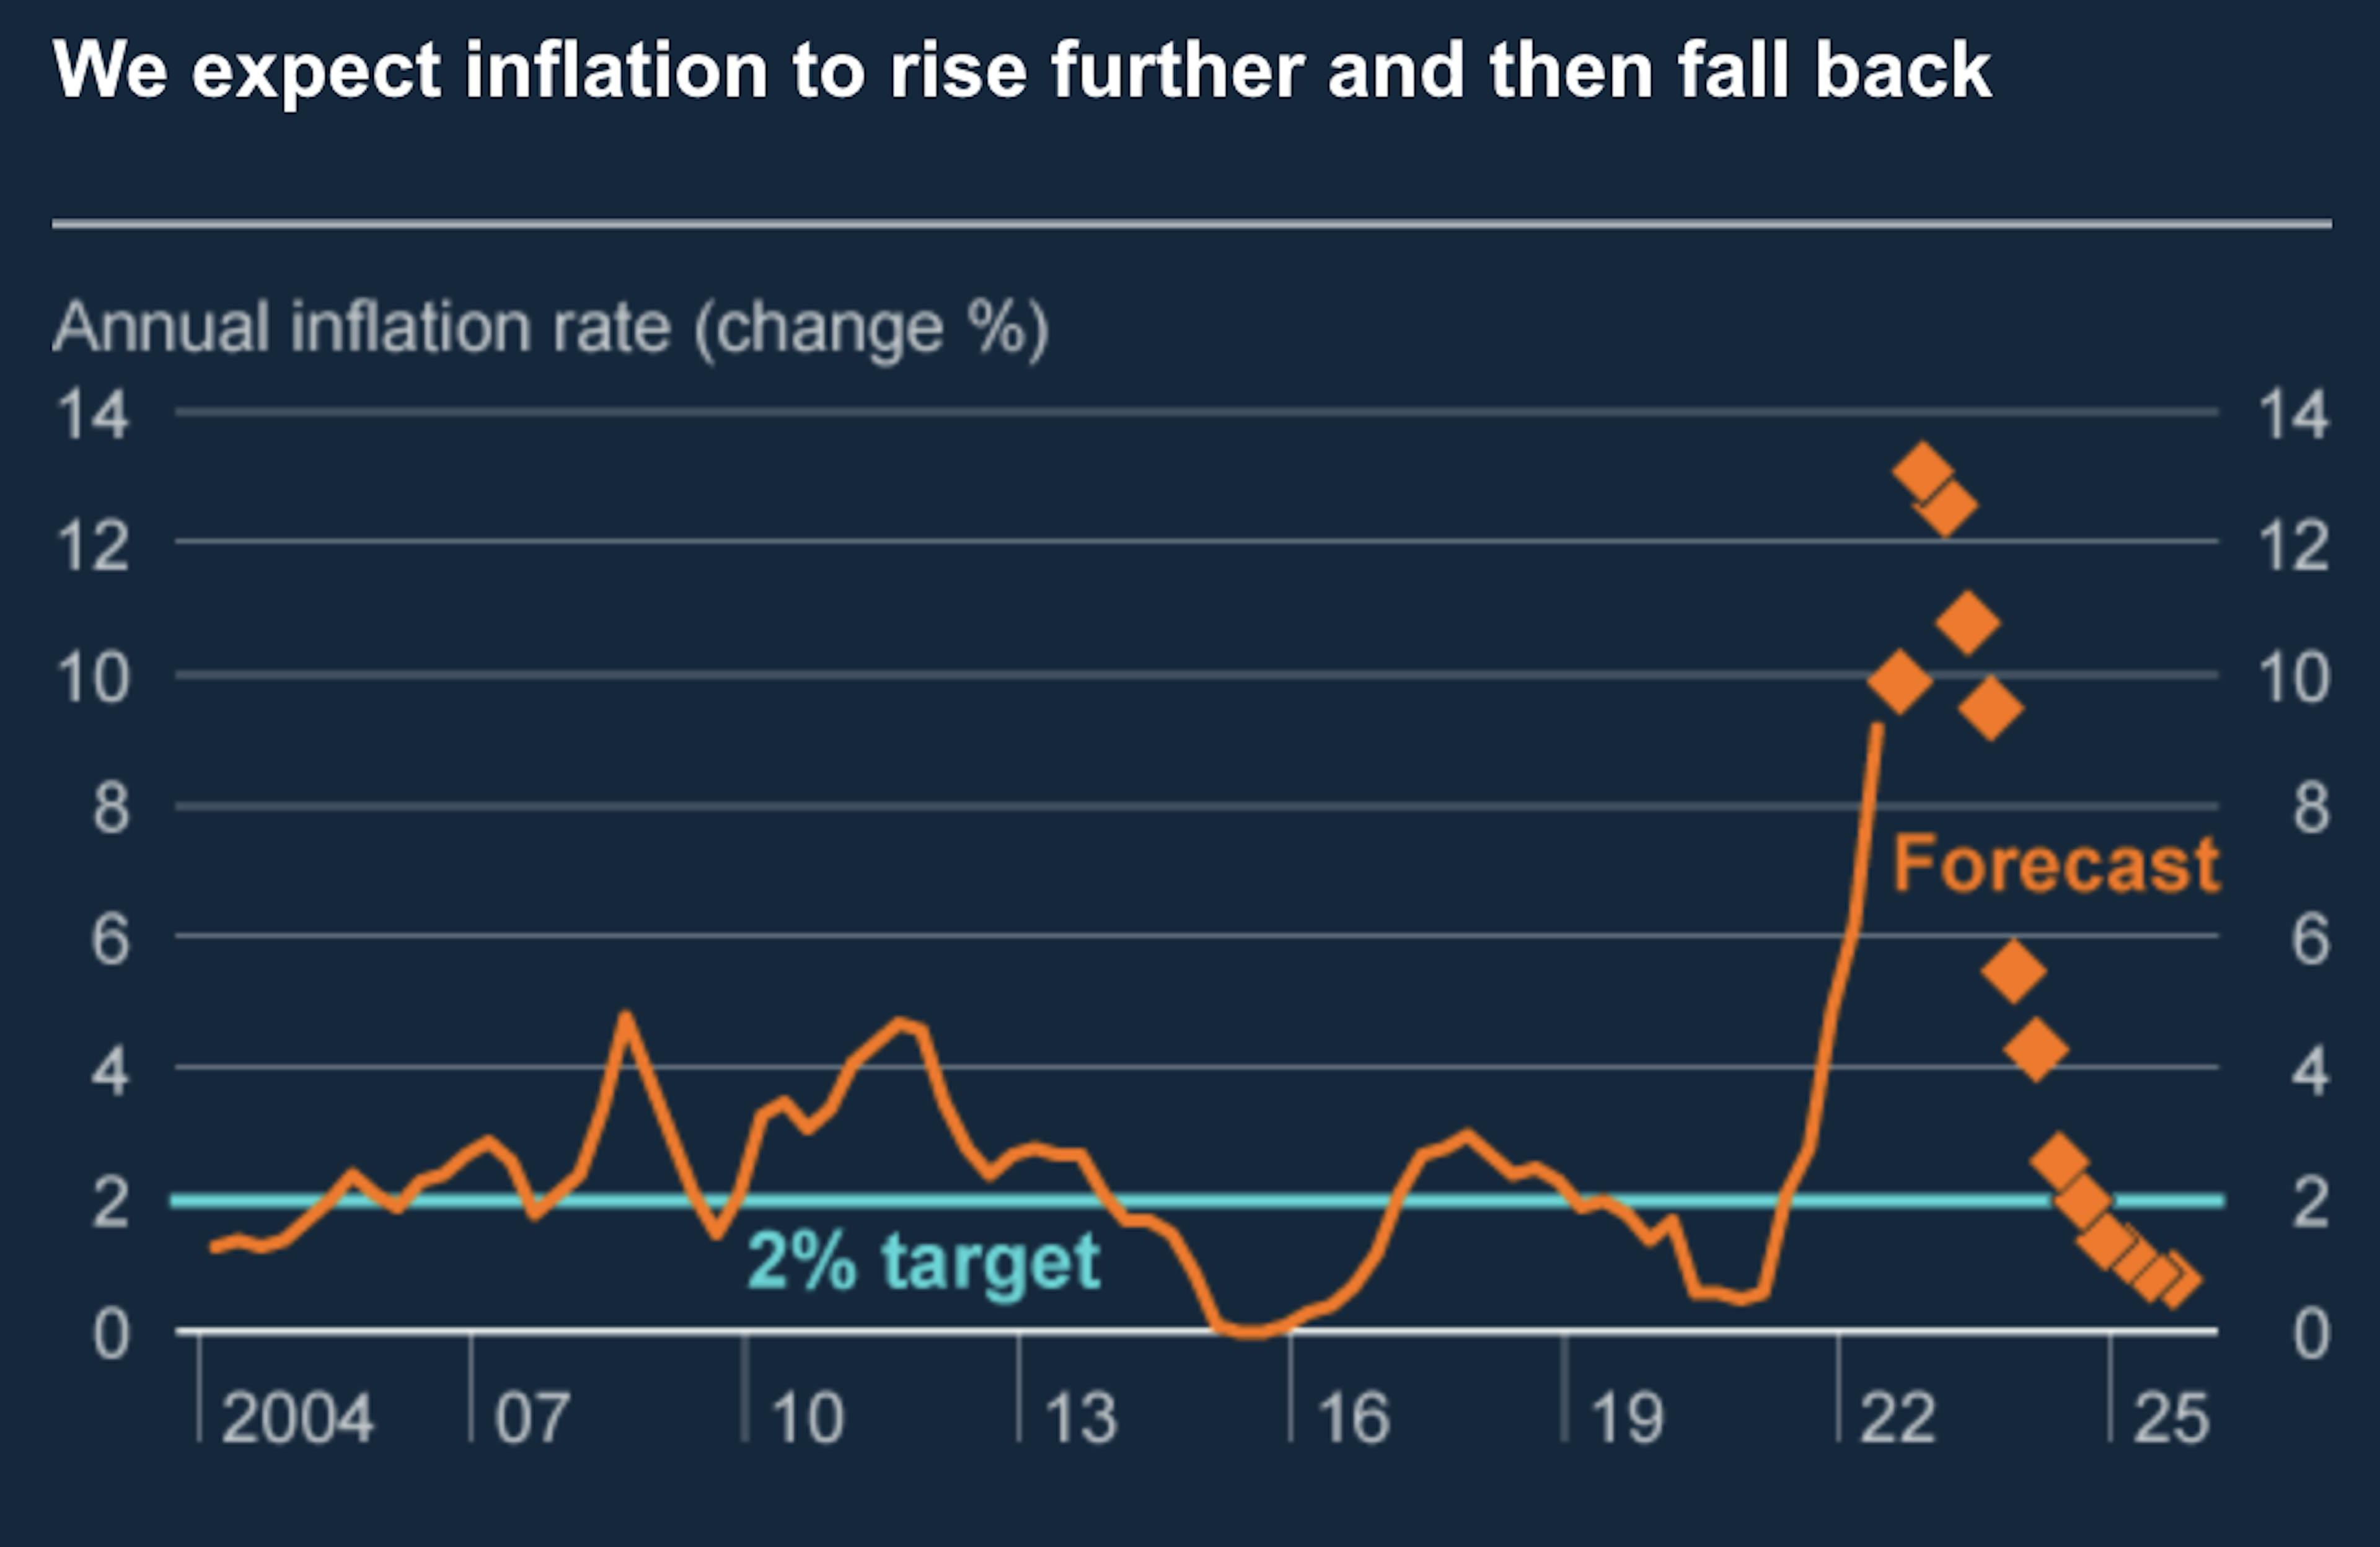 Source: Monetary Policy Report (https://www.bankofengland.co.uk/monetary-policy-report/2022/august-2022)__ Aug 2022, BOE